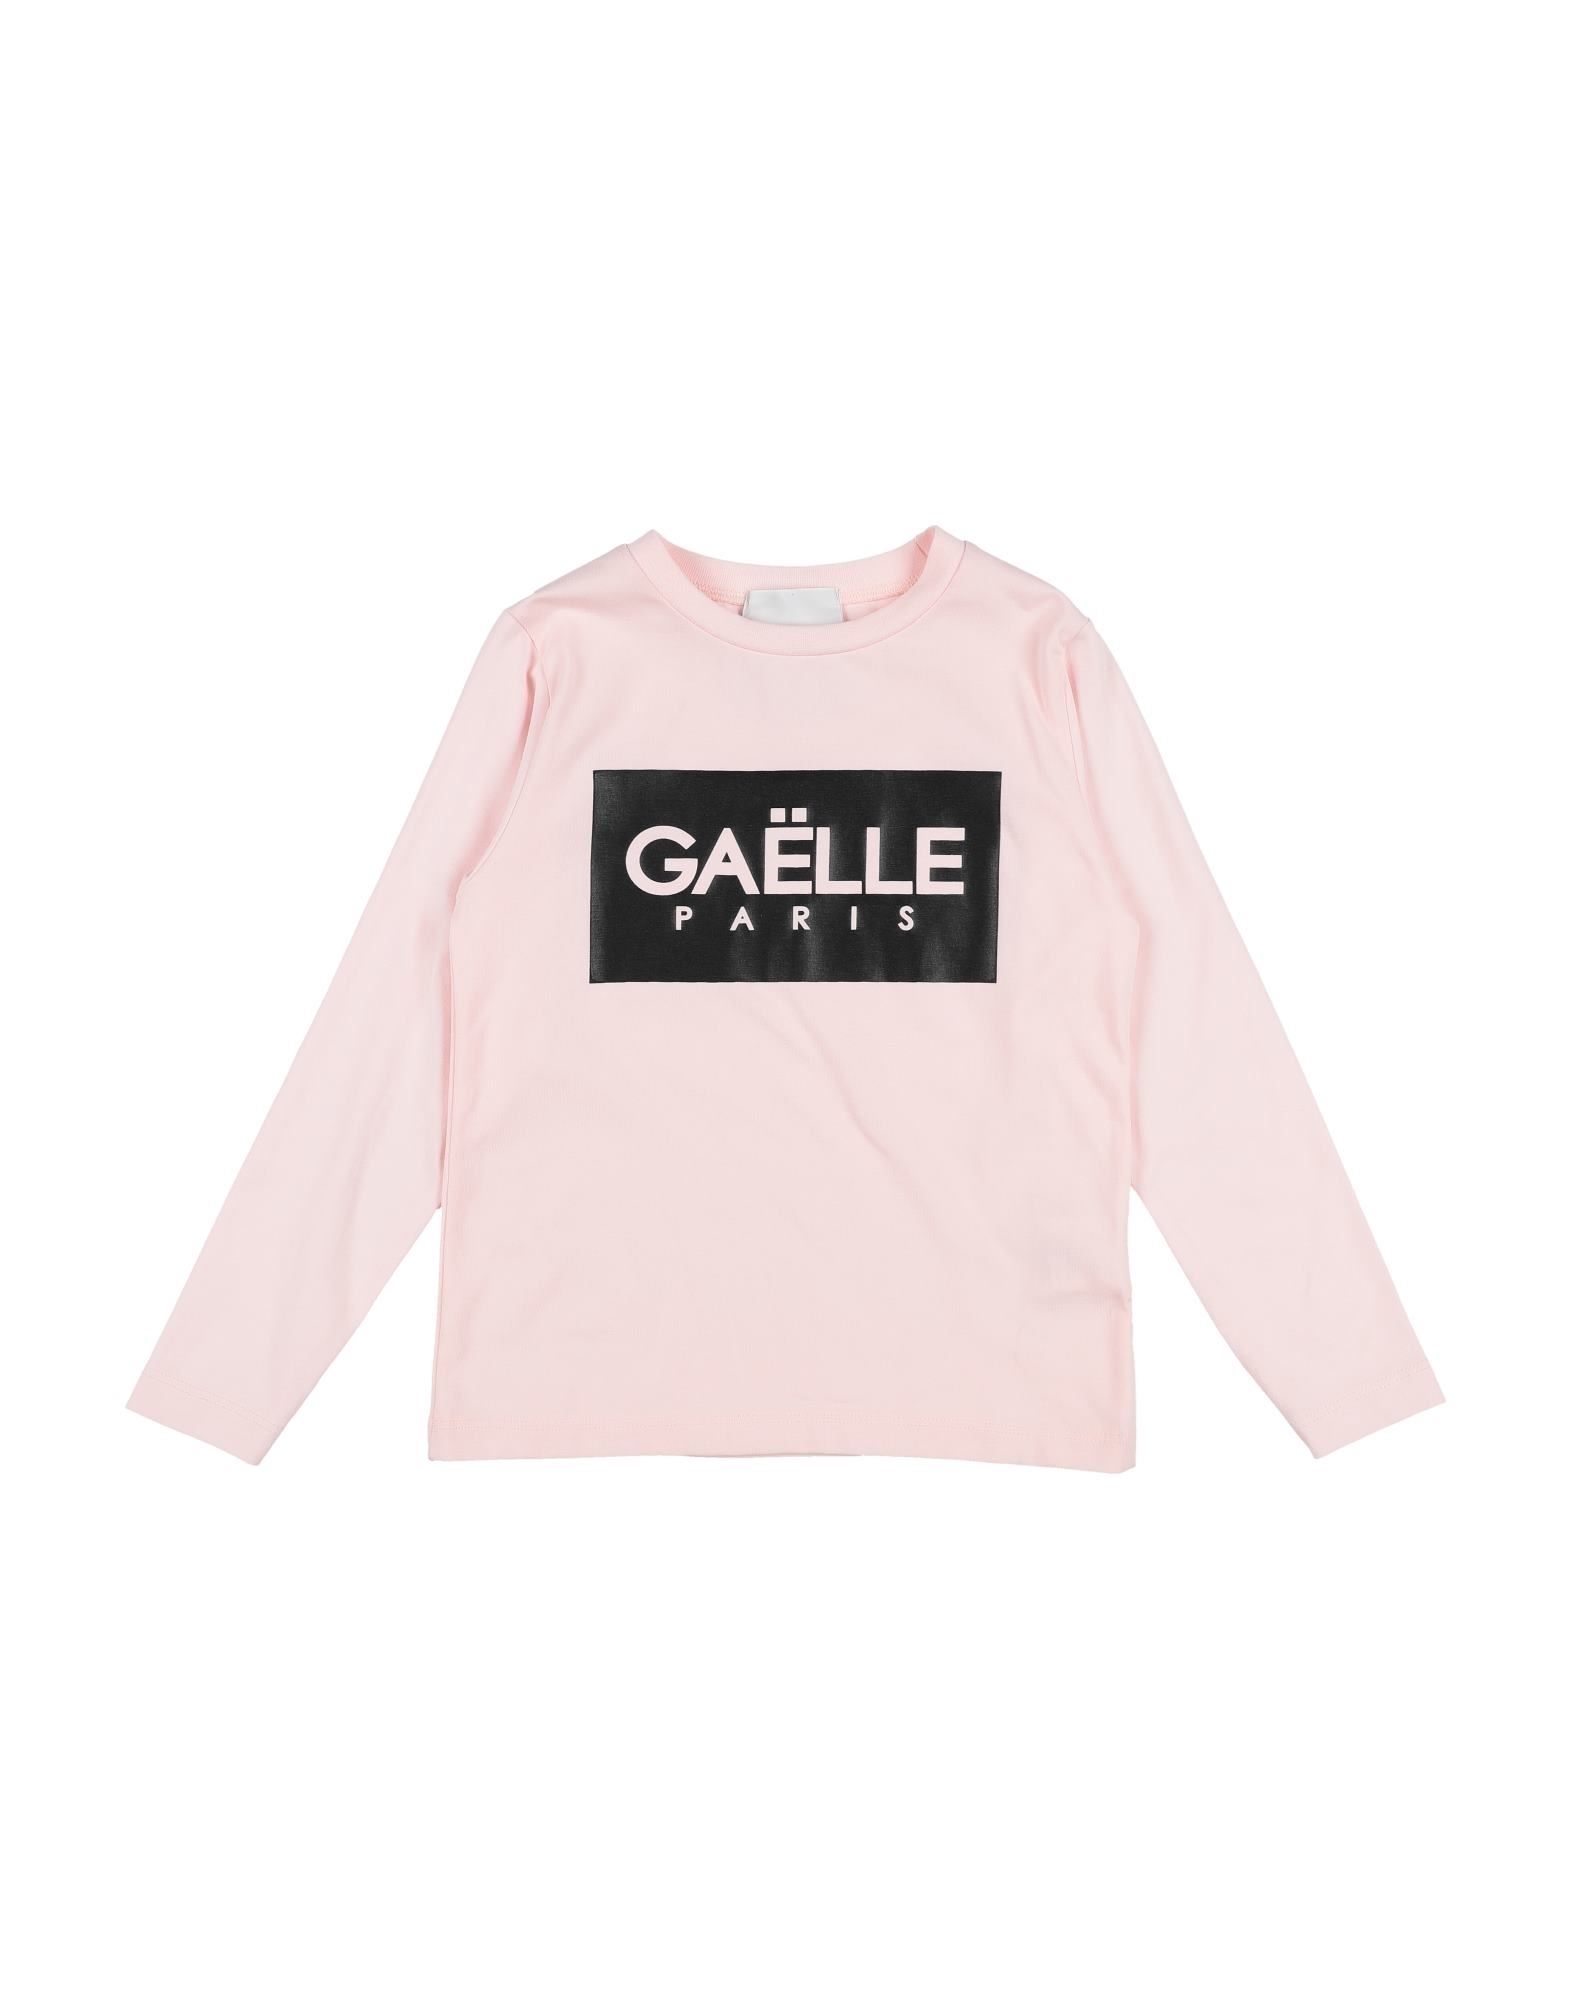 GAeLLE Paris T-shirts ボーイズ キッズ Koo Kaidoku - Tシャツ・カットソー -  egginselectrical.com.au